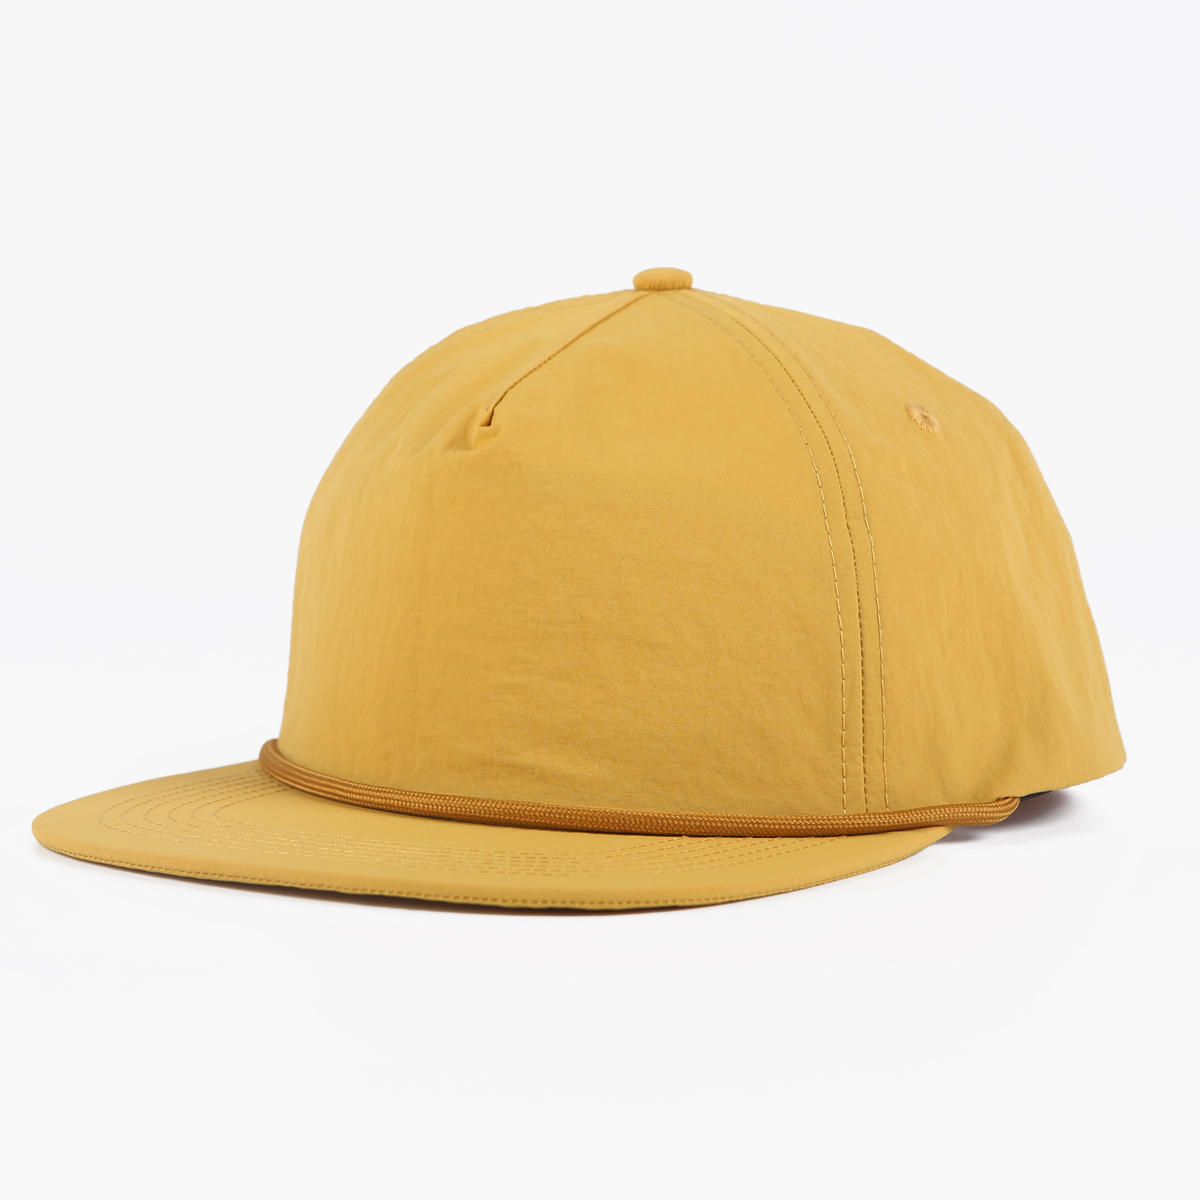 Blank 5 Panel Trucker Hats Wholesale Manufacturer- Foremost